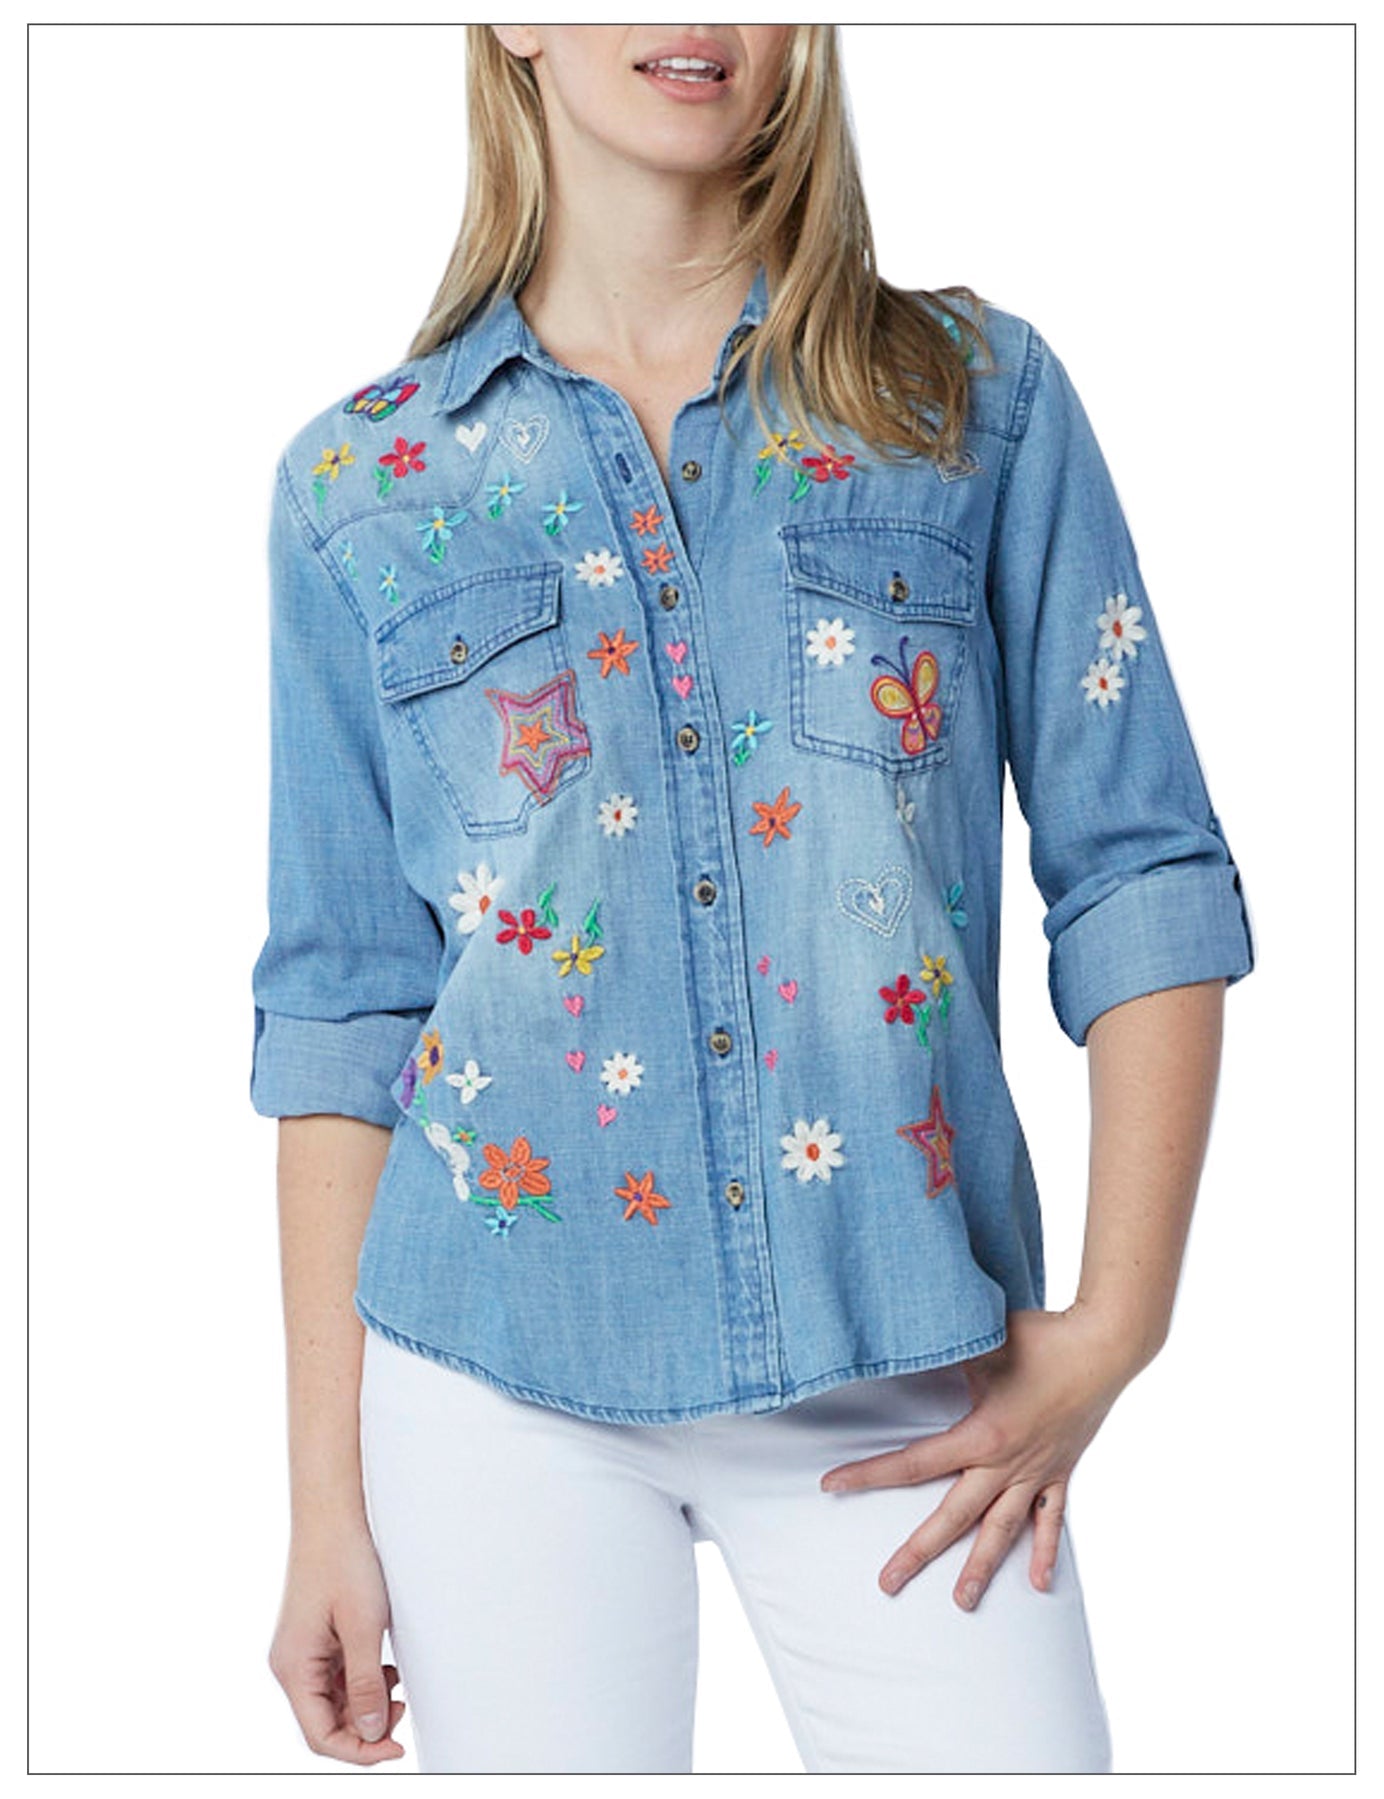 Kelly Sketchbook Star Butterfly & Floral Embroidery - Denim